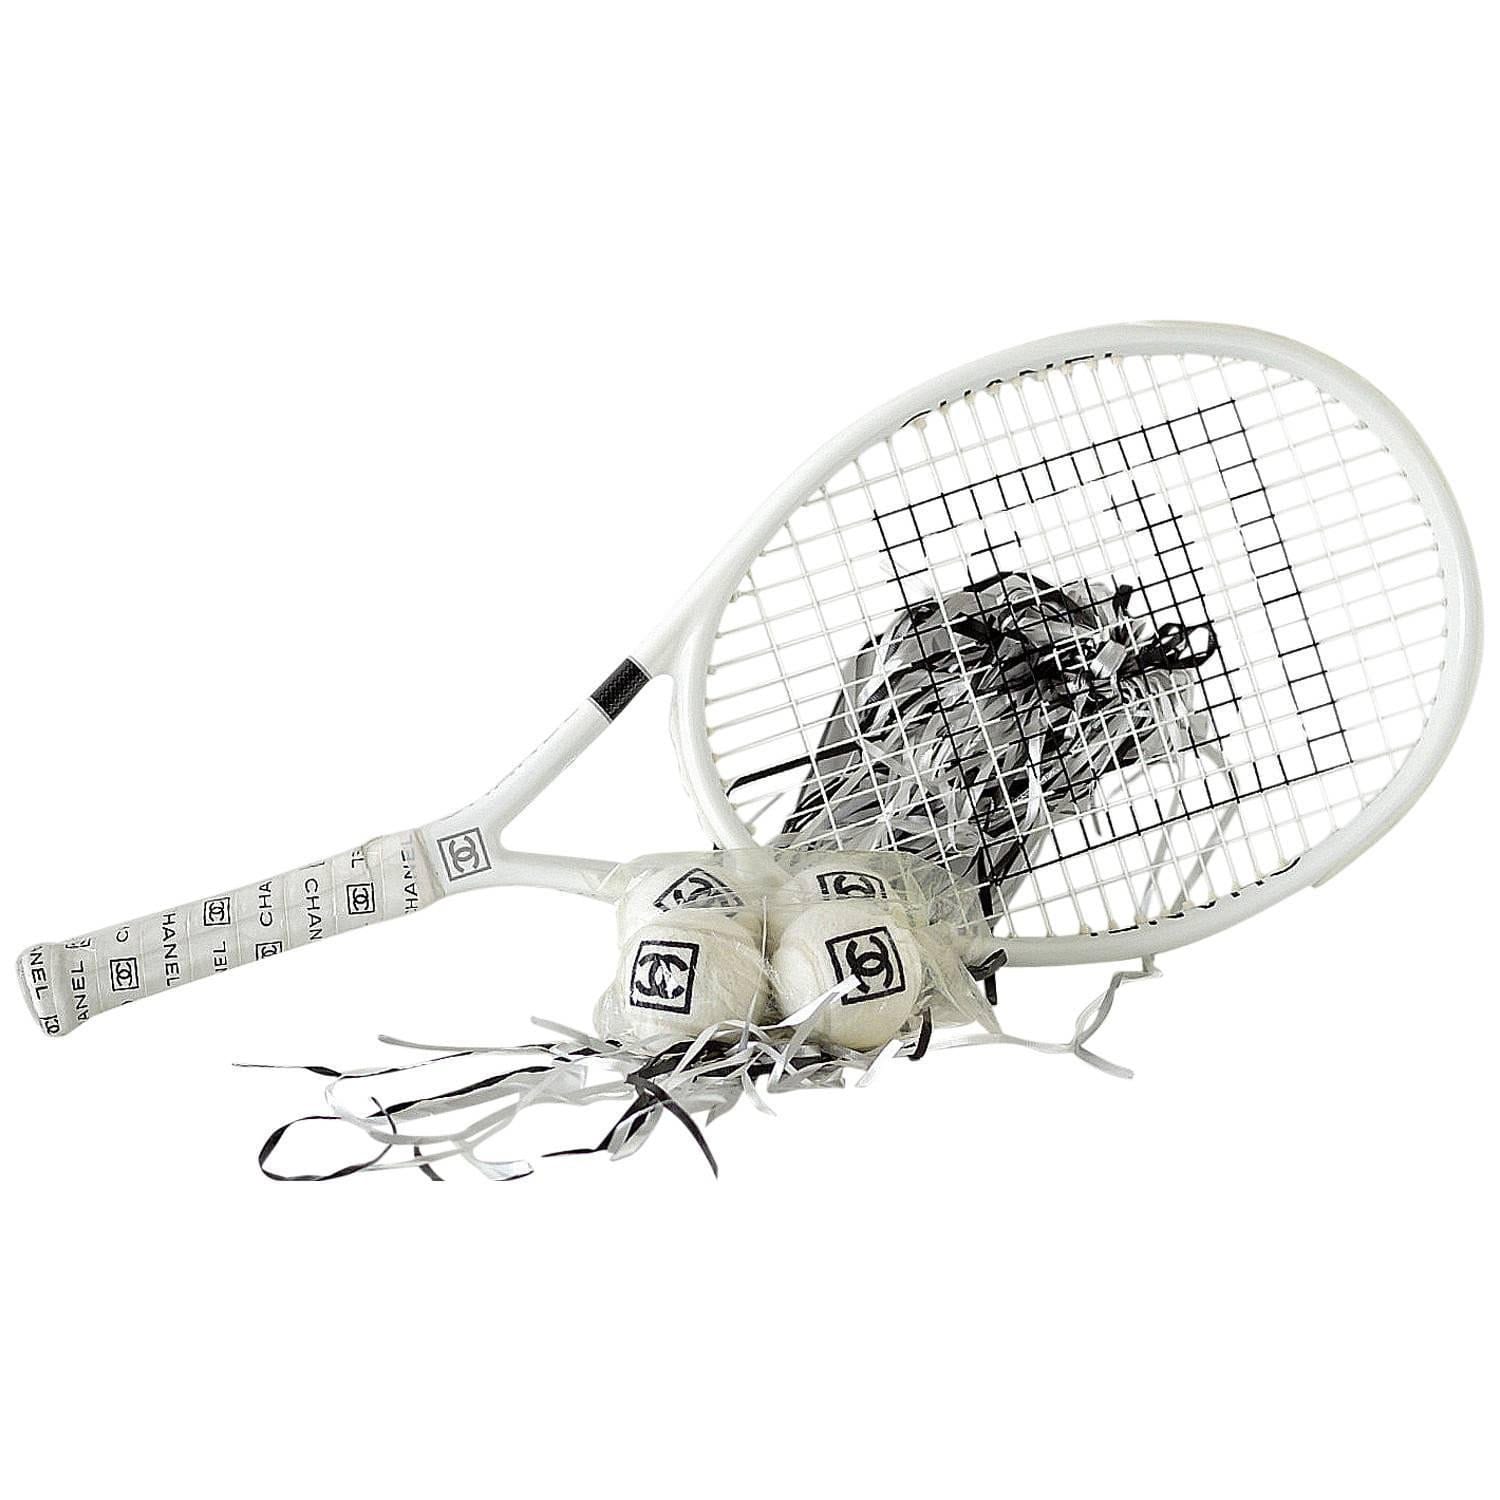 Chanel Limited Edition Tennis Racquet Racket 4 Tennis Balls and Case new - mightychic